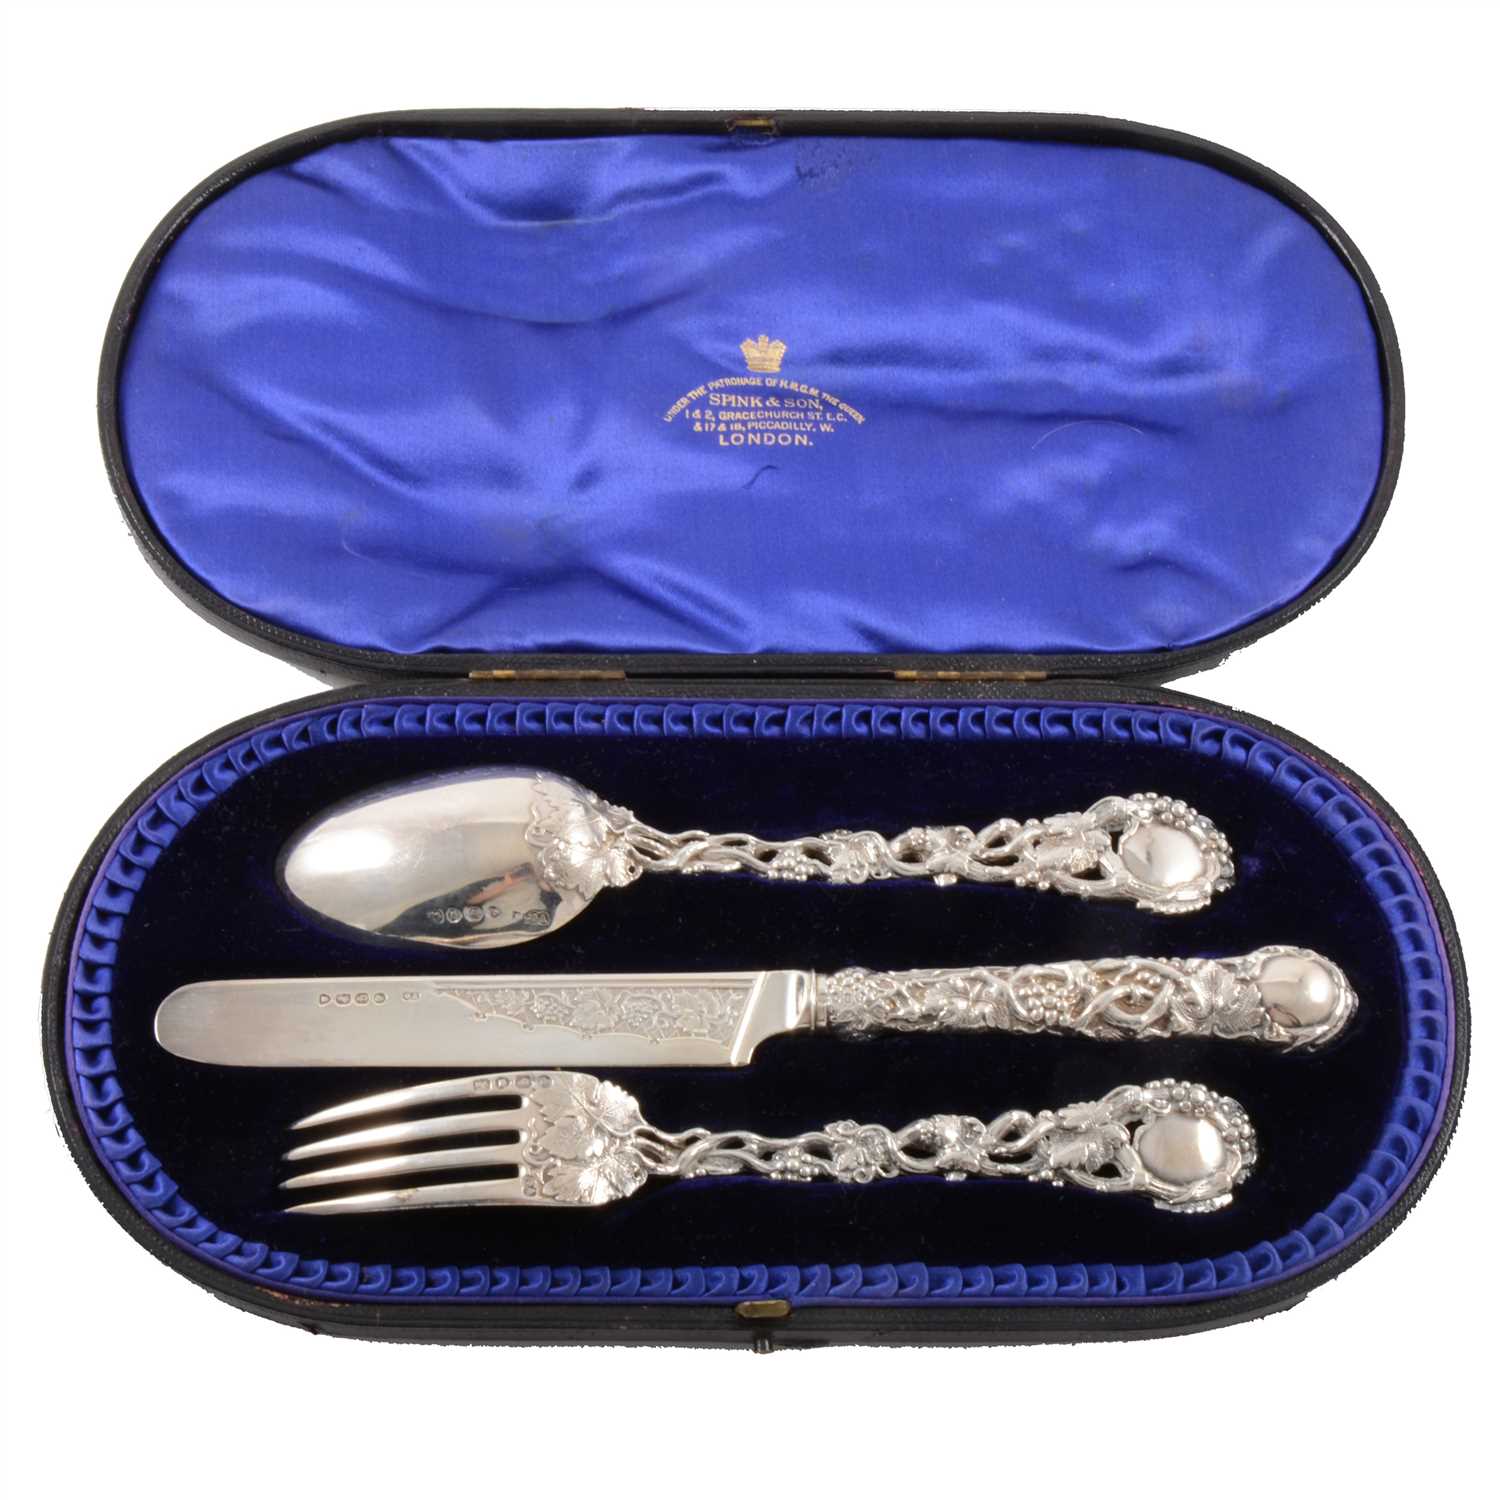 Lot 100 - Victorian silver knife, fork and spoon set, George Adams, London 1857